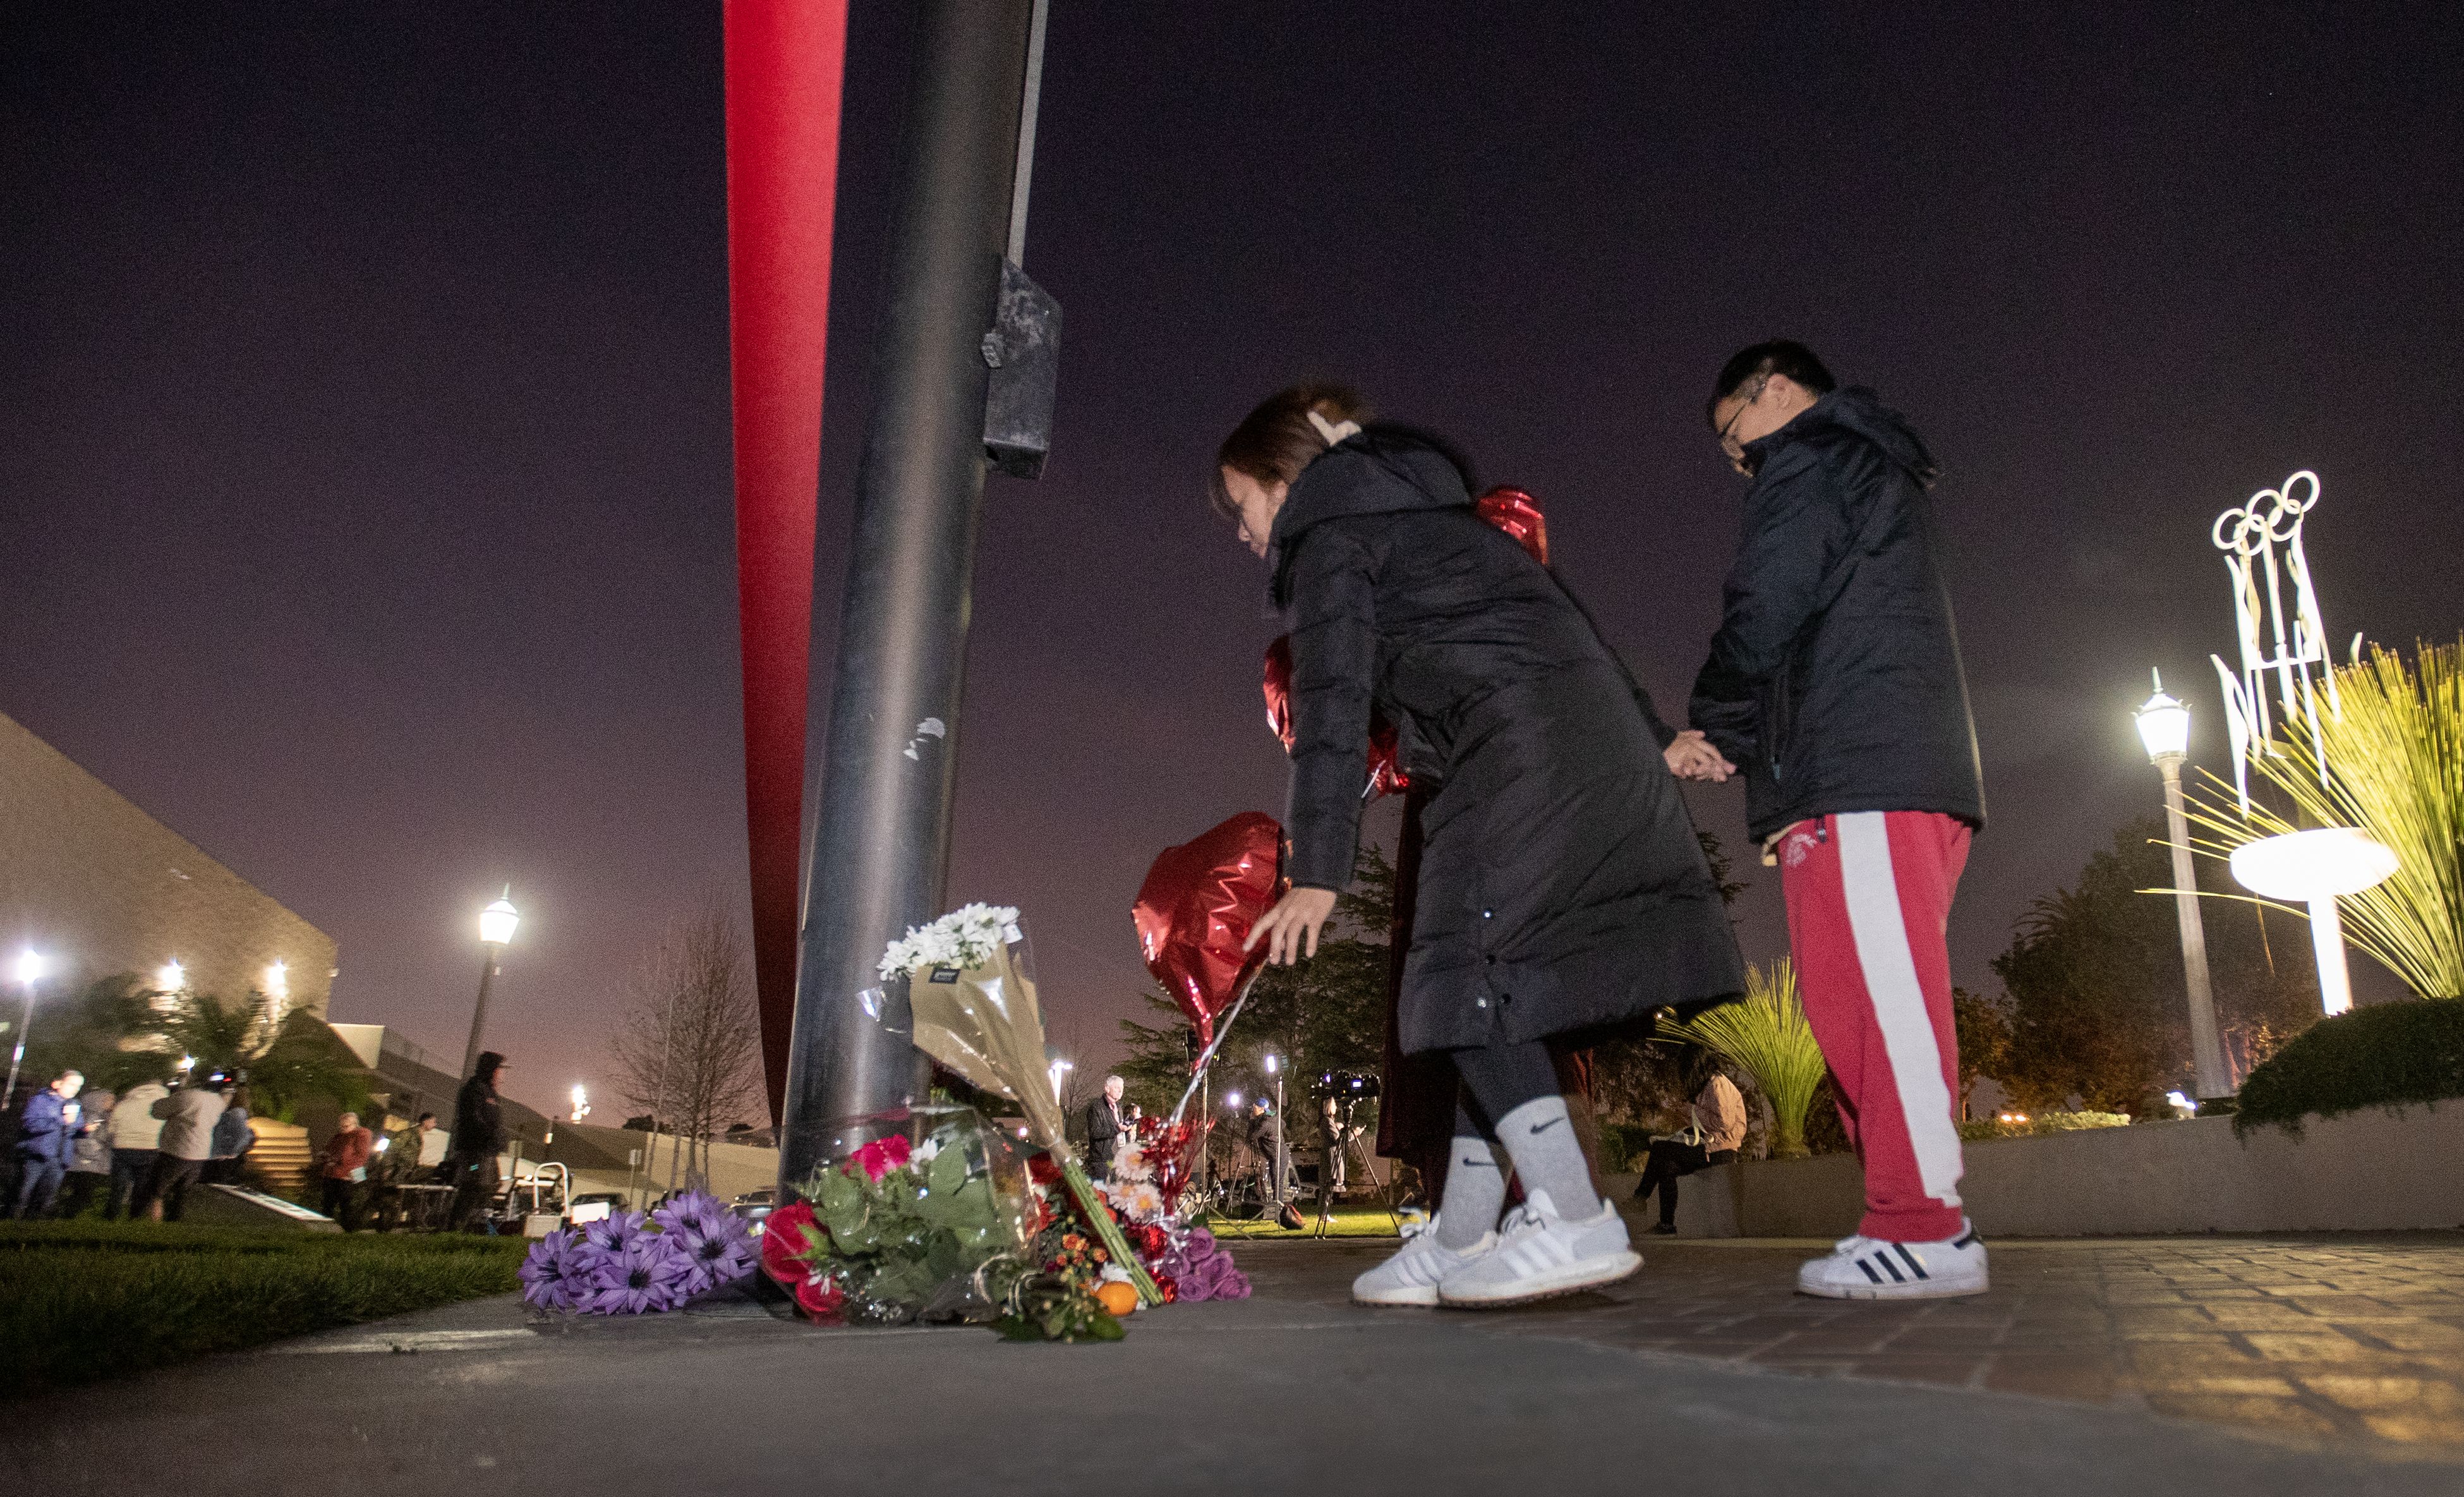 People who brought flowers join another paying their respects at a memorial for Monterey Park mass shooting victims after a news conference at the Monterey Park Civic Center on Sunday, Jan. 22. 